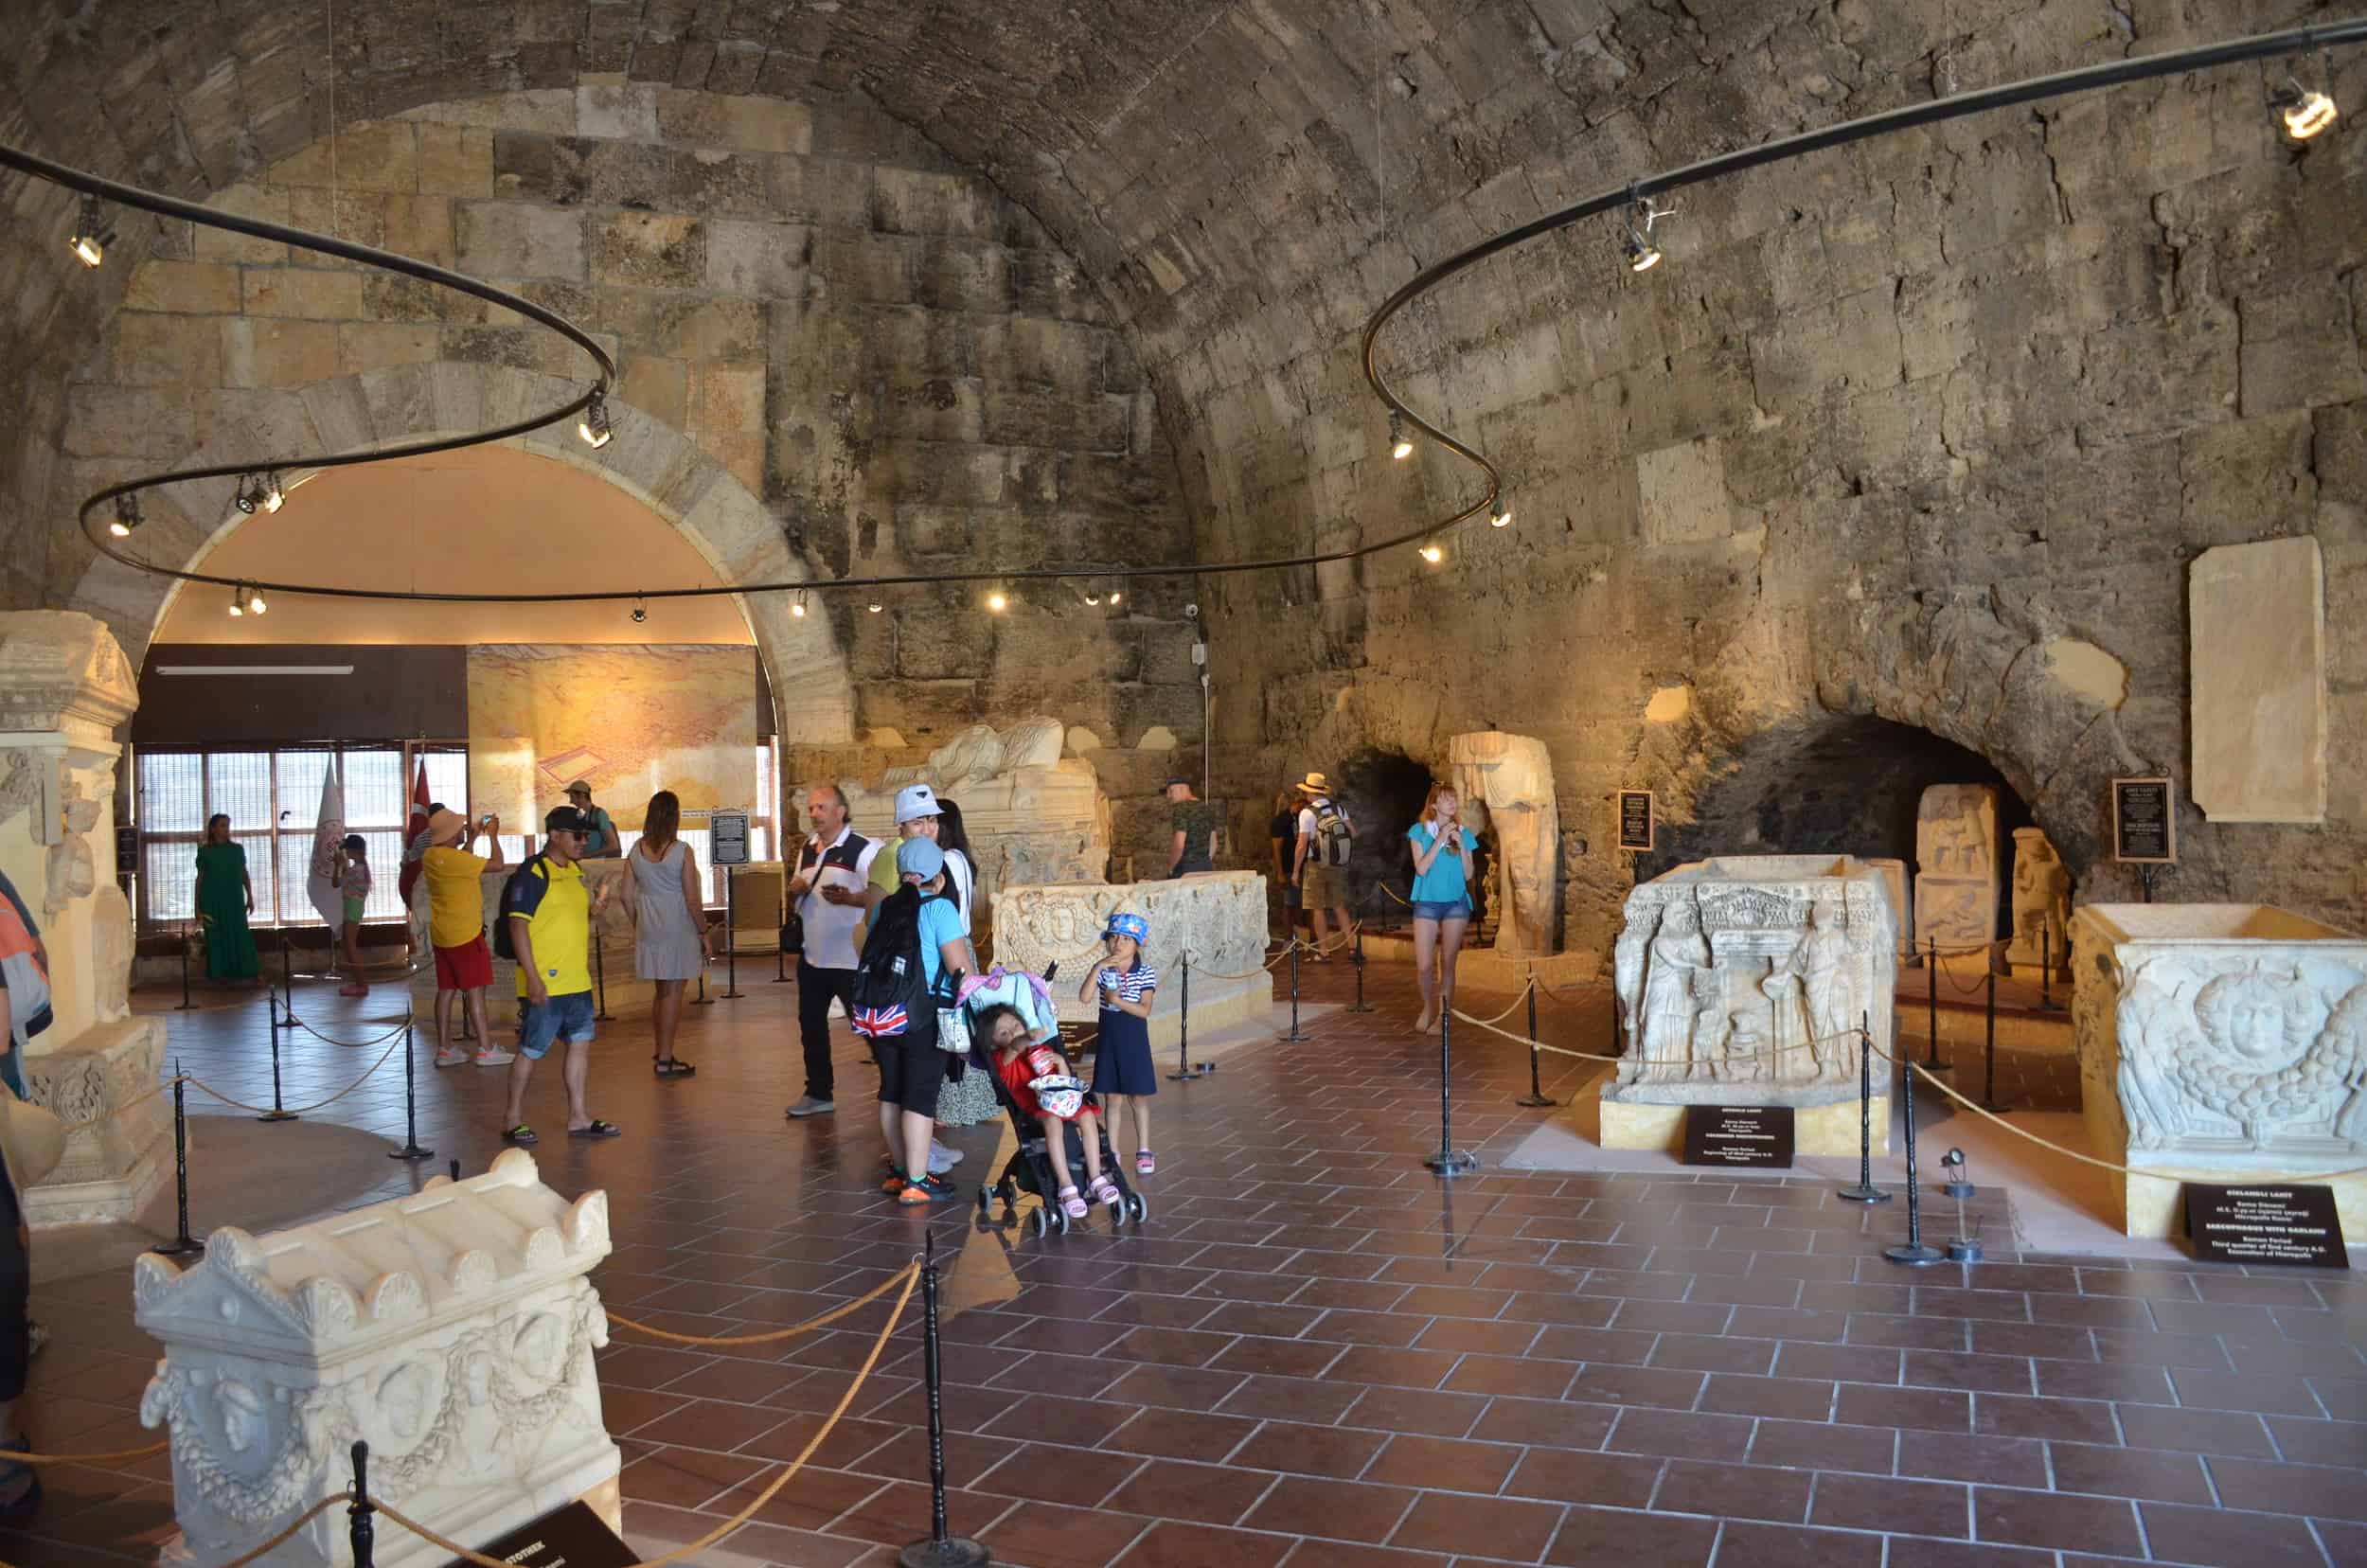 Sarcophagi and Statues Gallery at the Hierapolis Museum